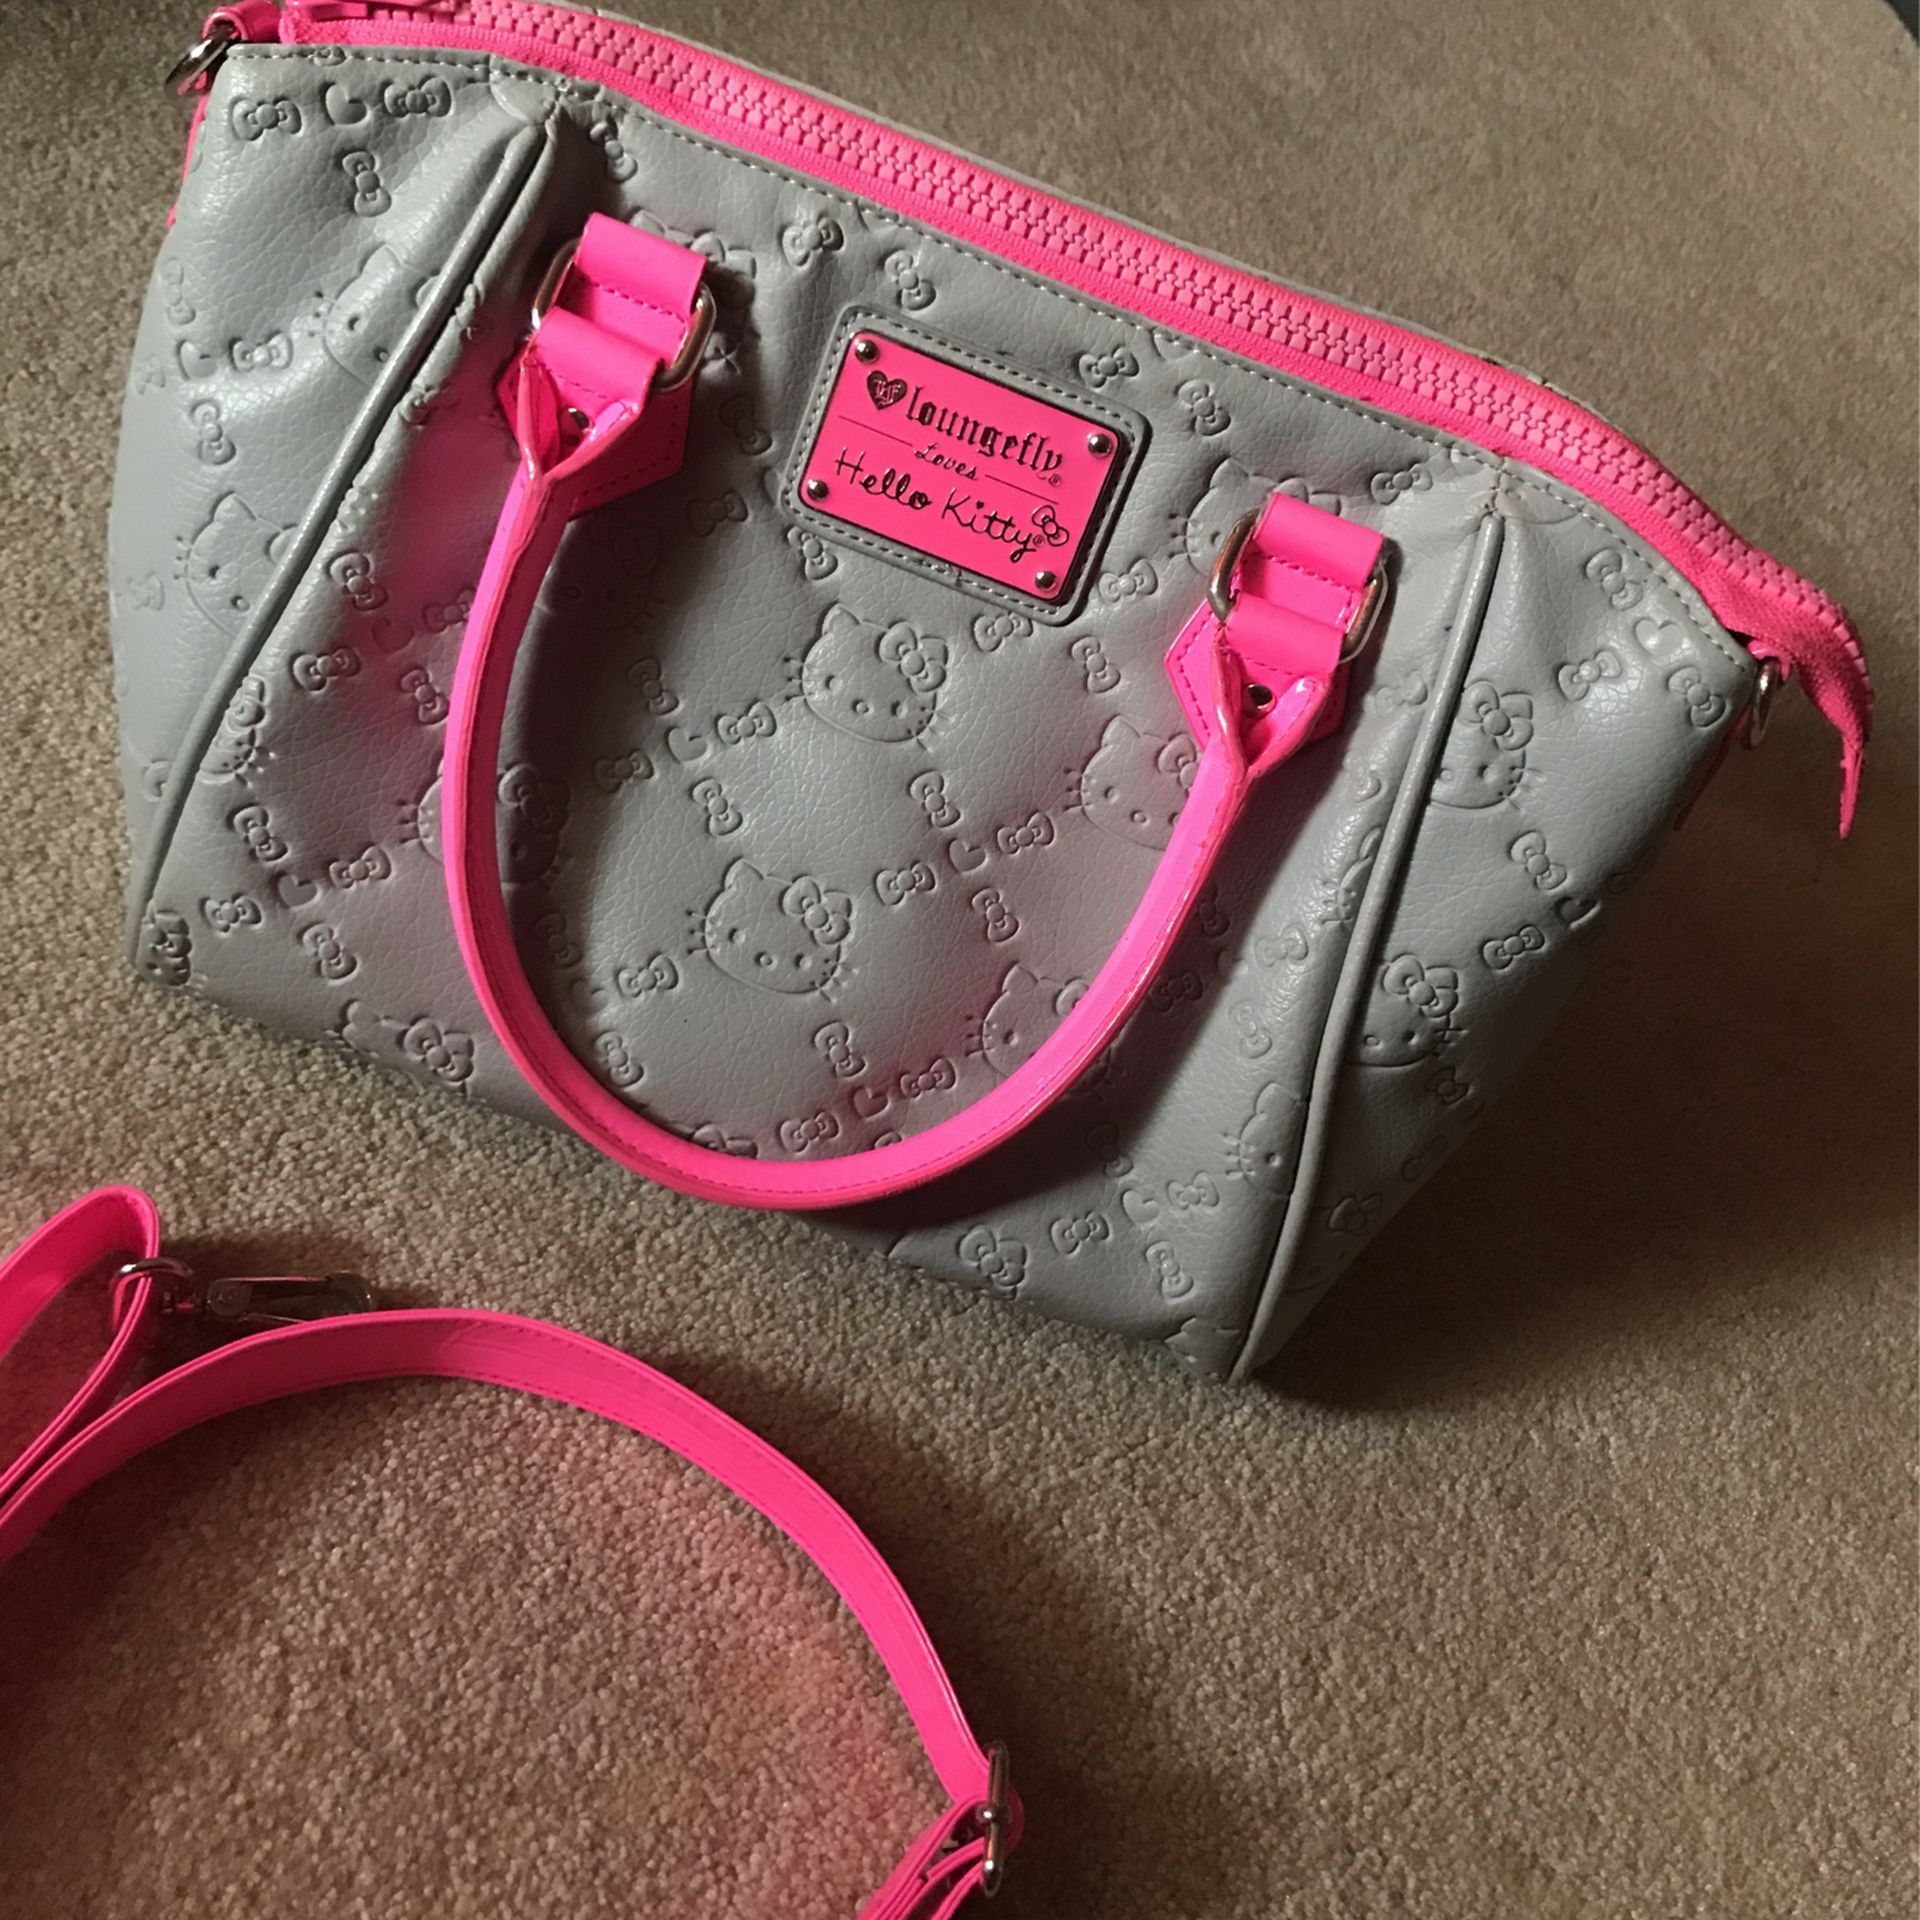 hello kitty loungefly backpack purse / wallet for Sale in Las Vegas, NV -  OfferUp